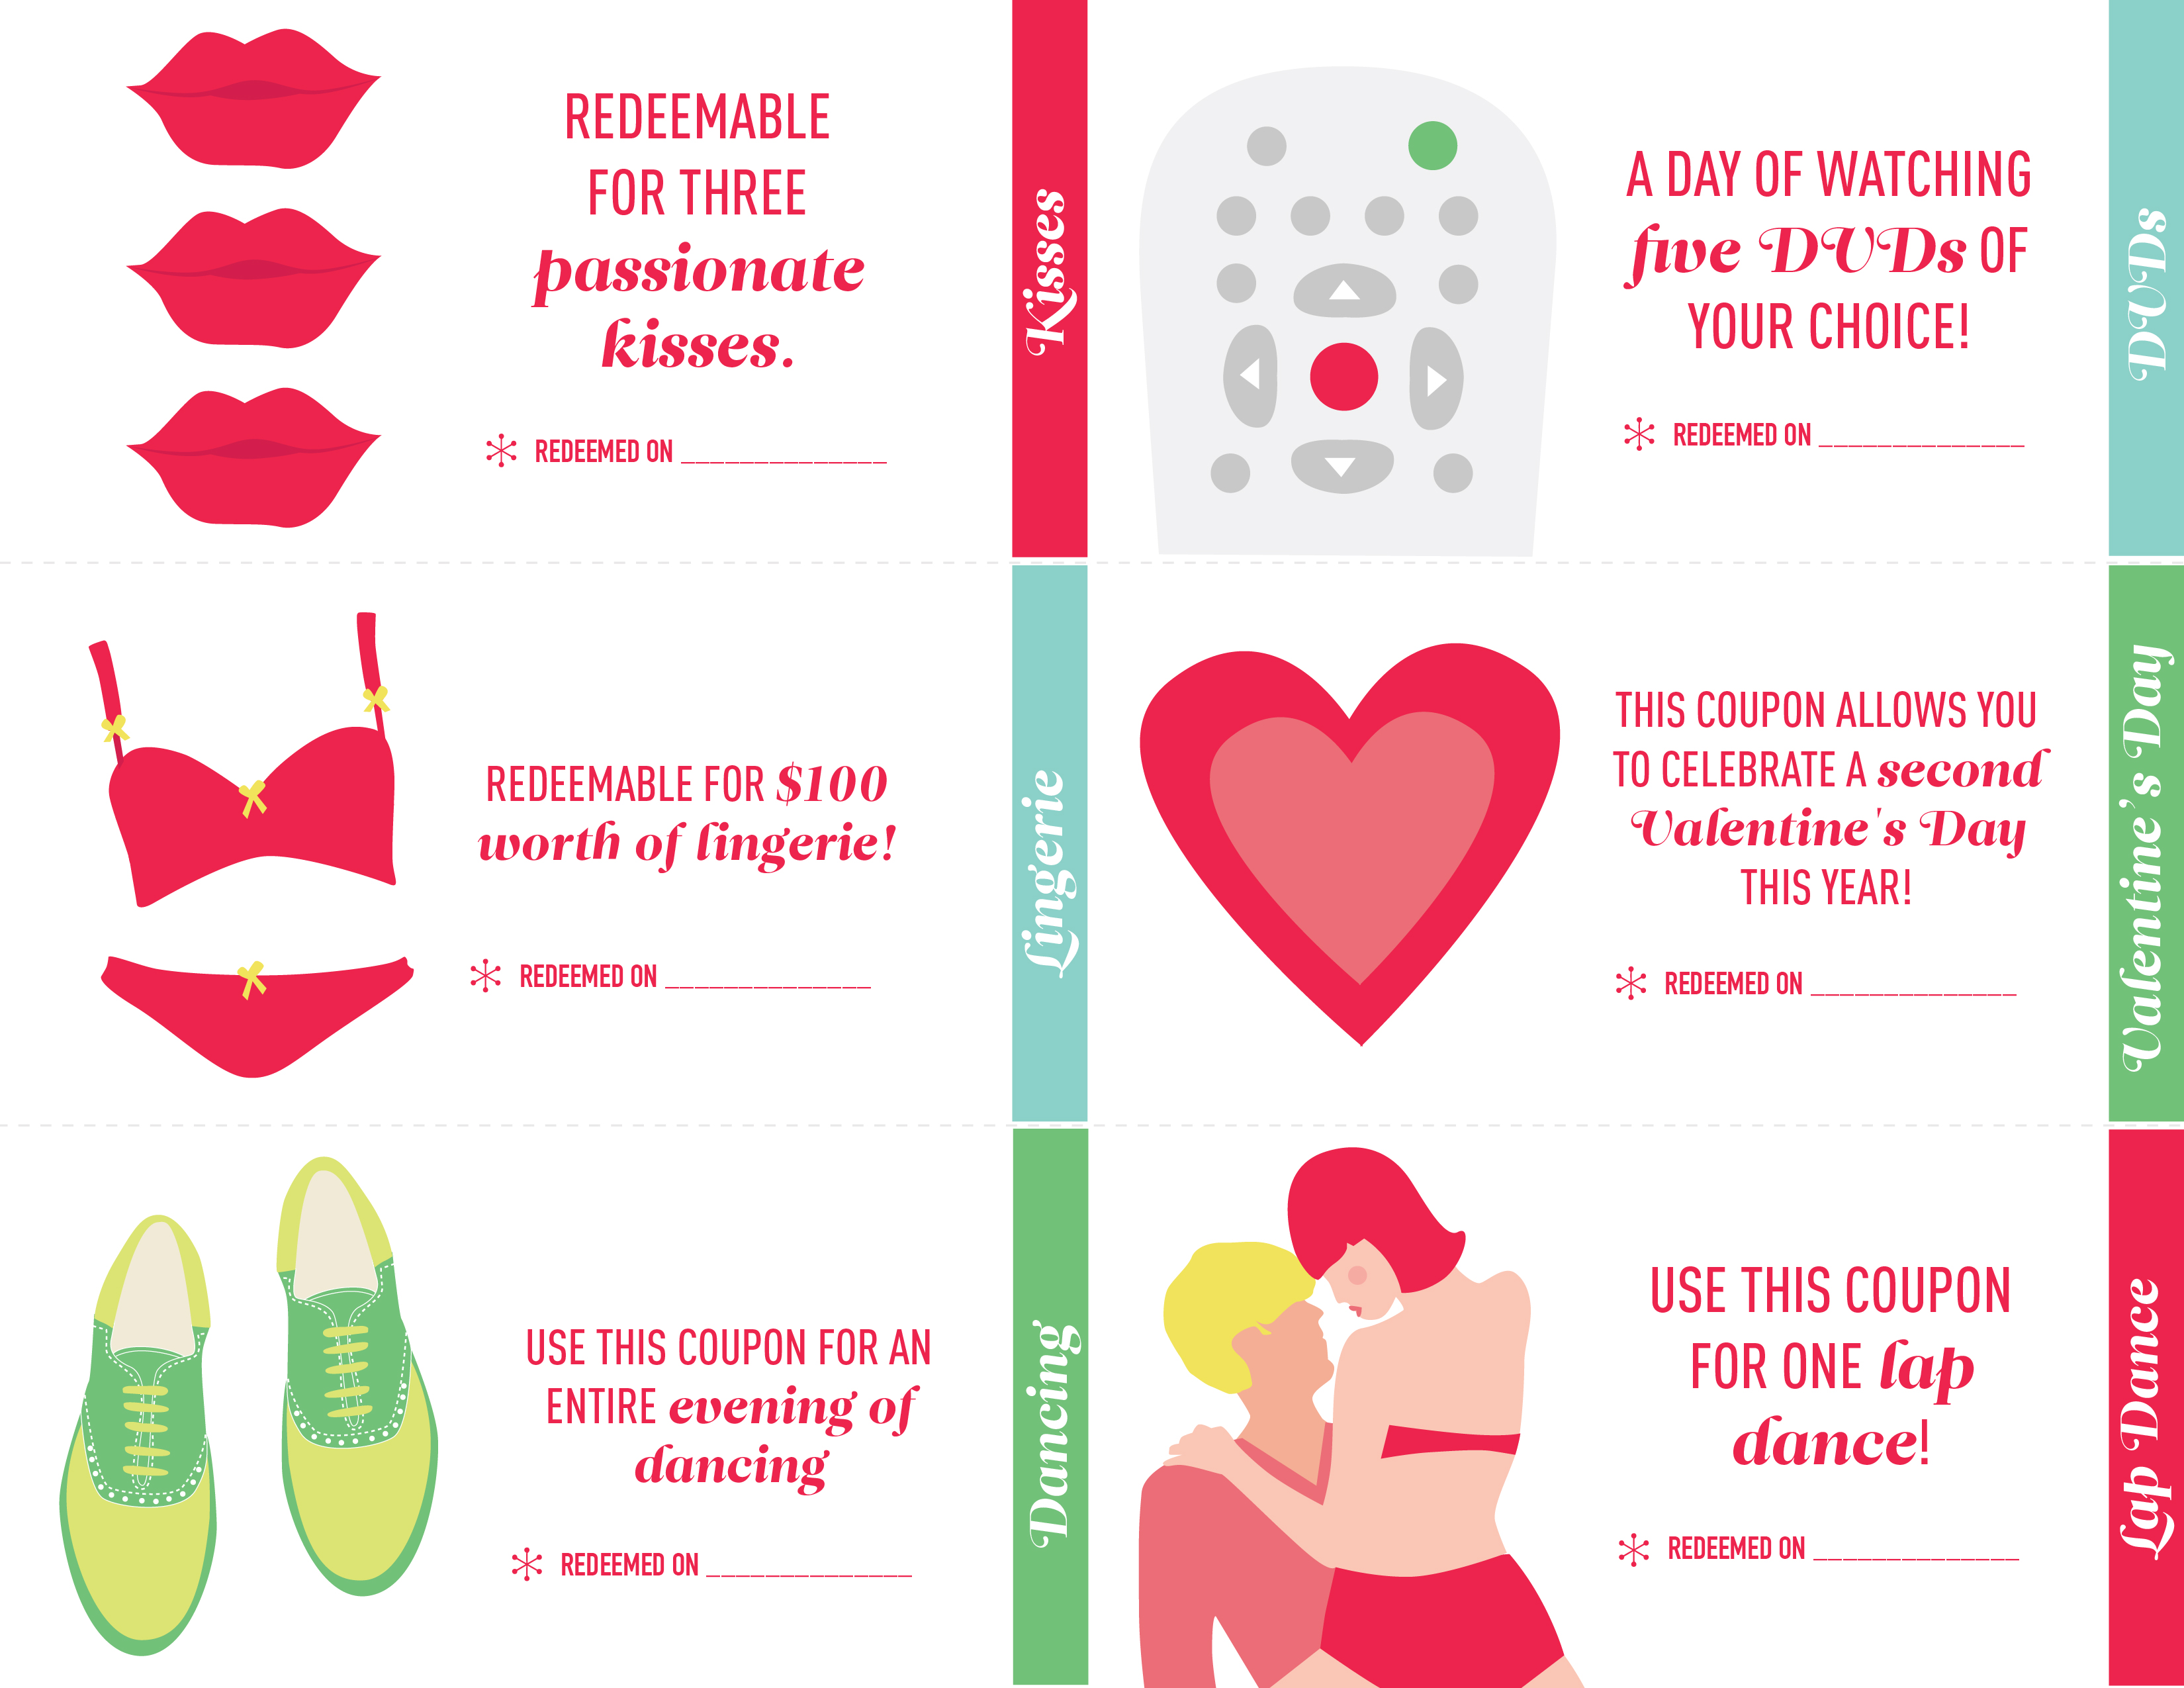 23 Love coupon book ideas for Valentine's Day